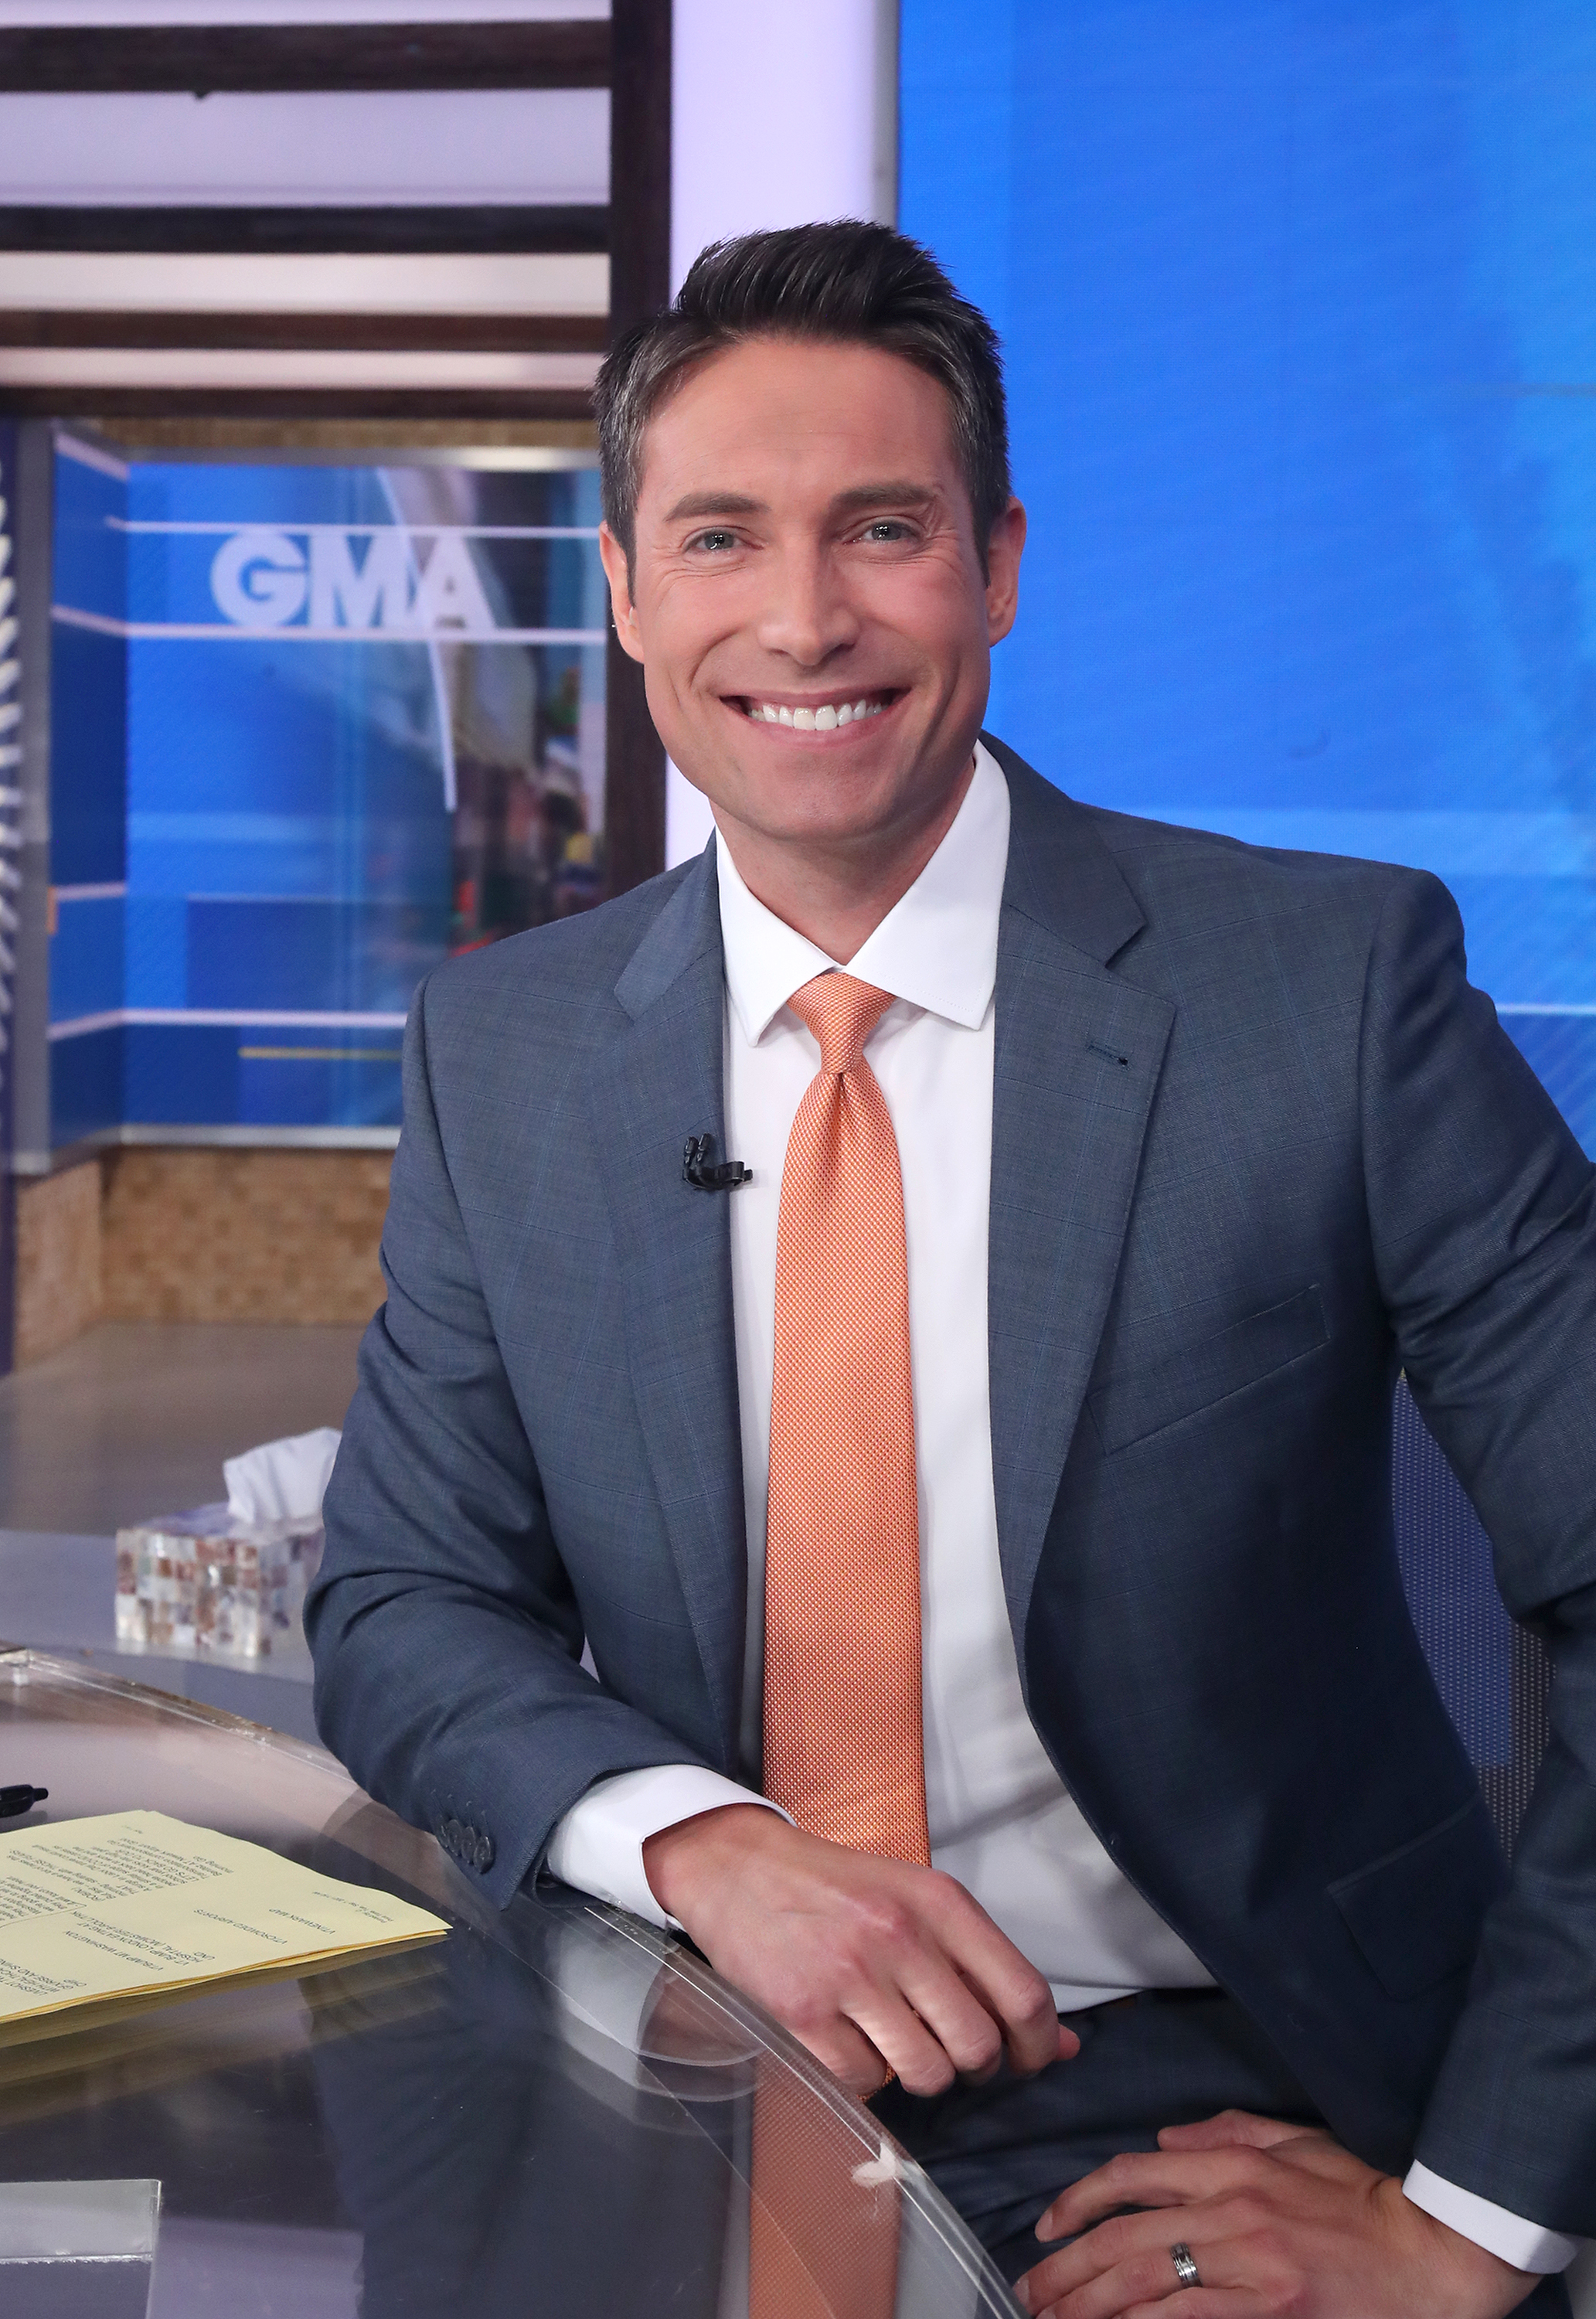 Whit has been filling in for George Stephanopoulos during the host's holiday absence